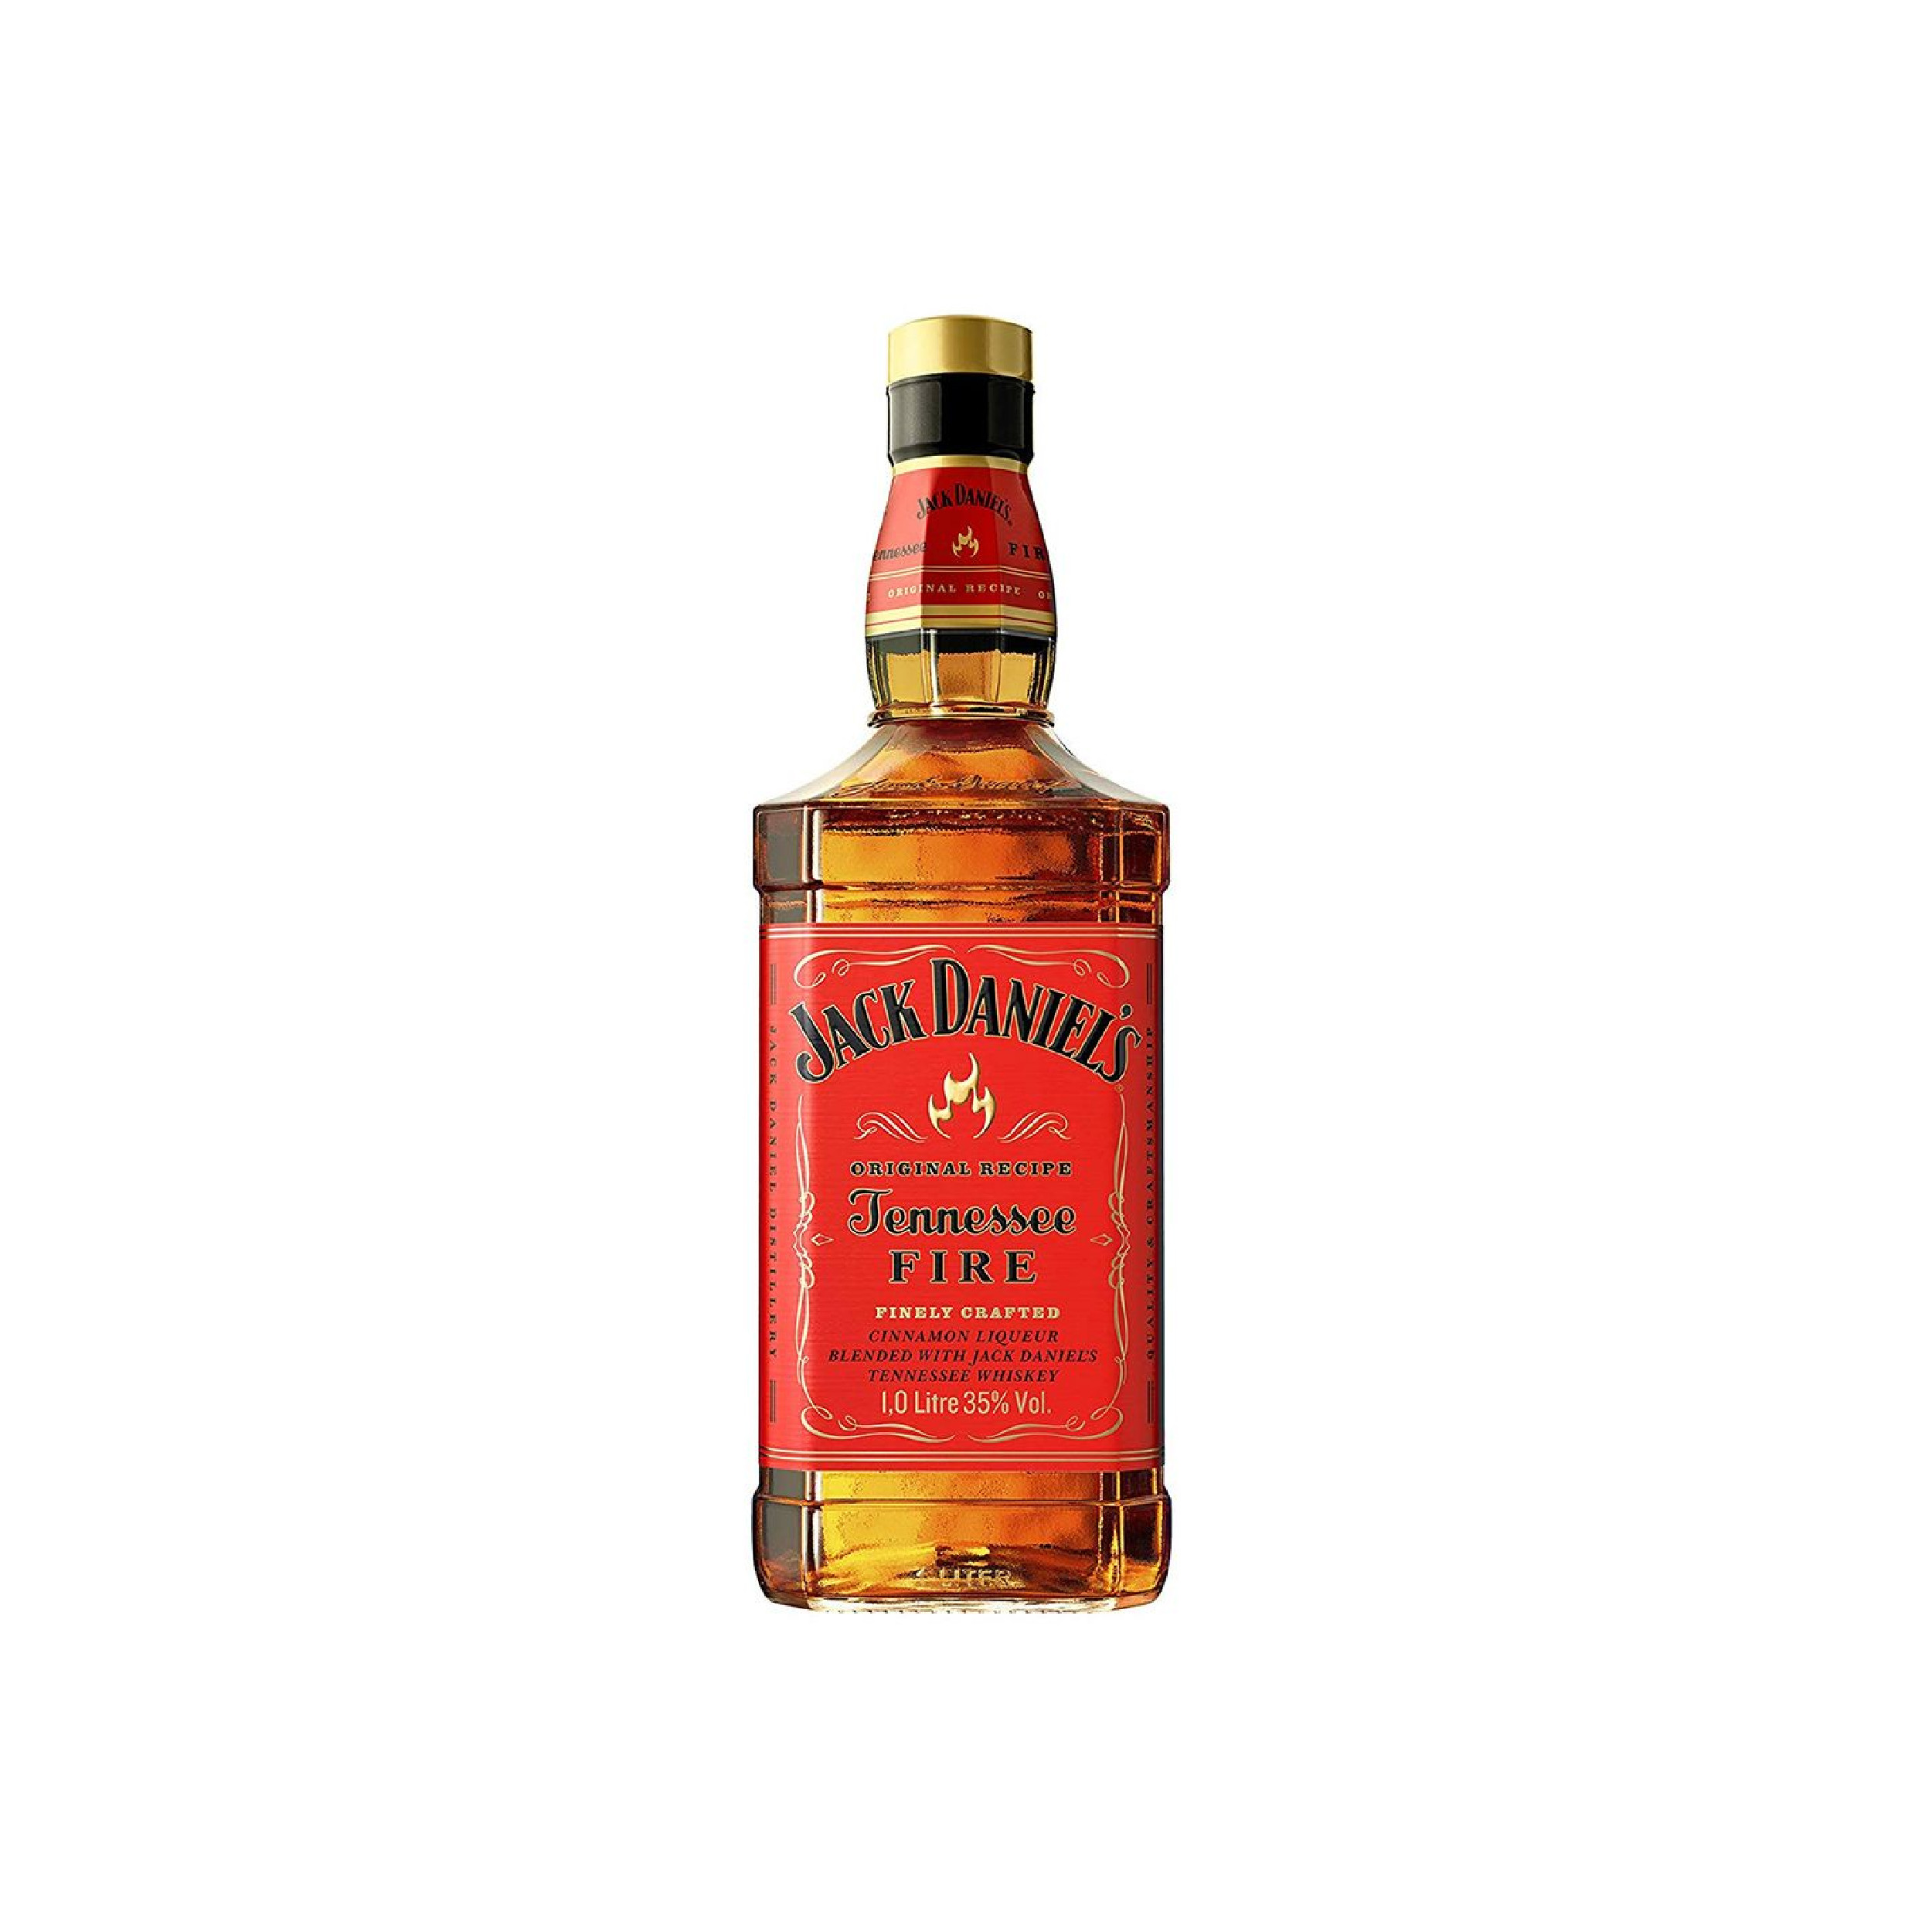 Jack Daniel's Tennessee Frie Whisky